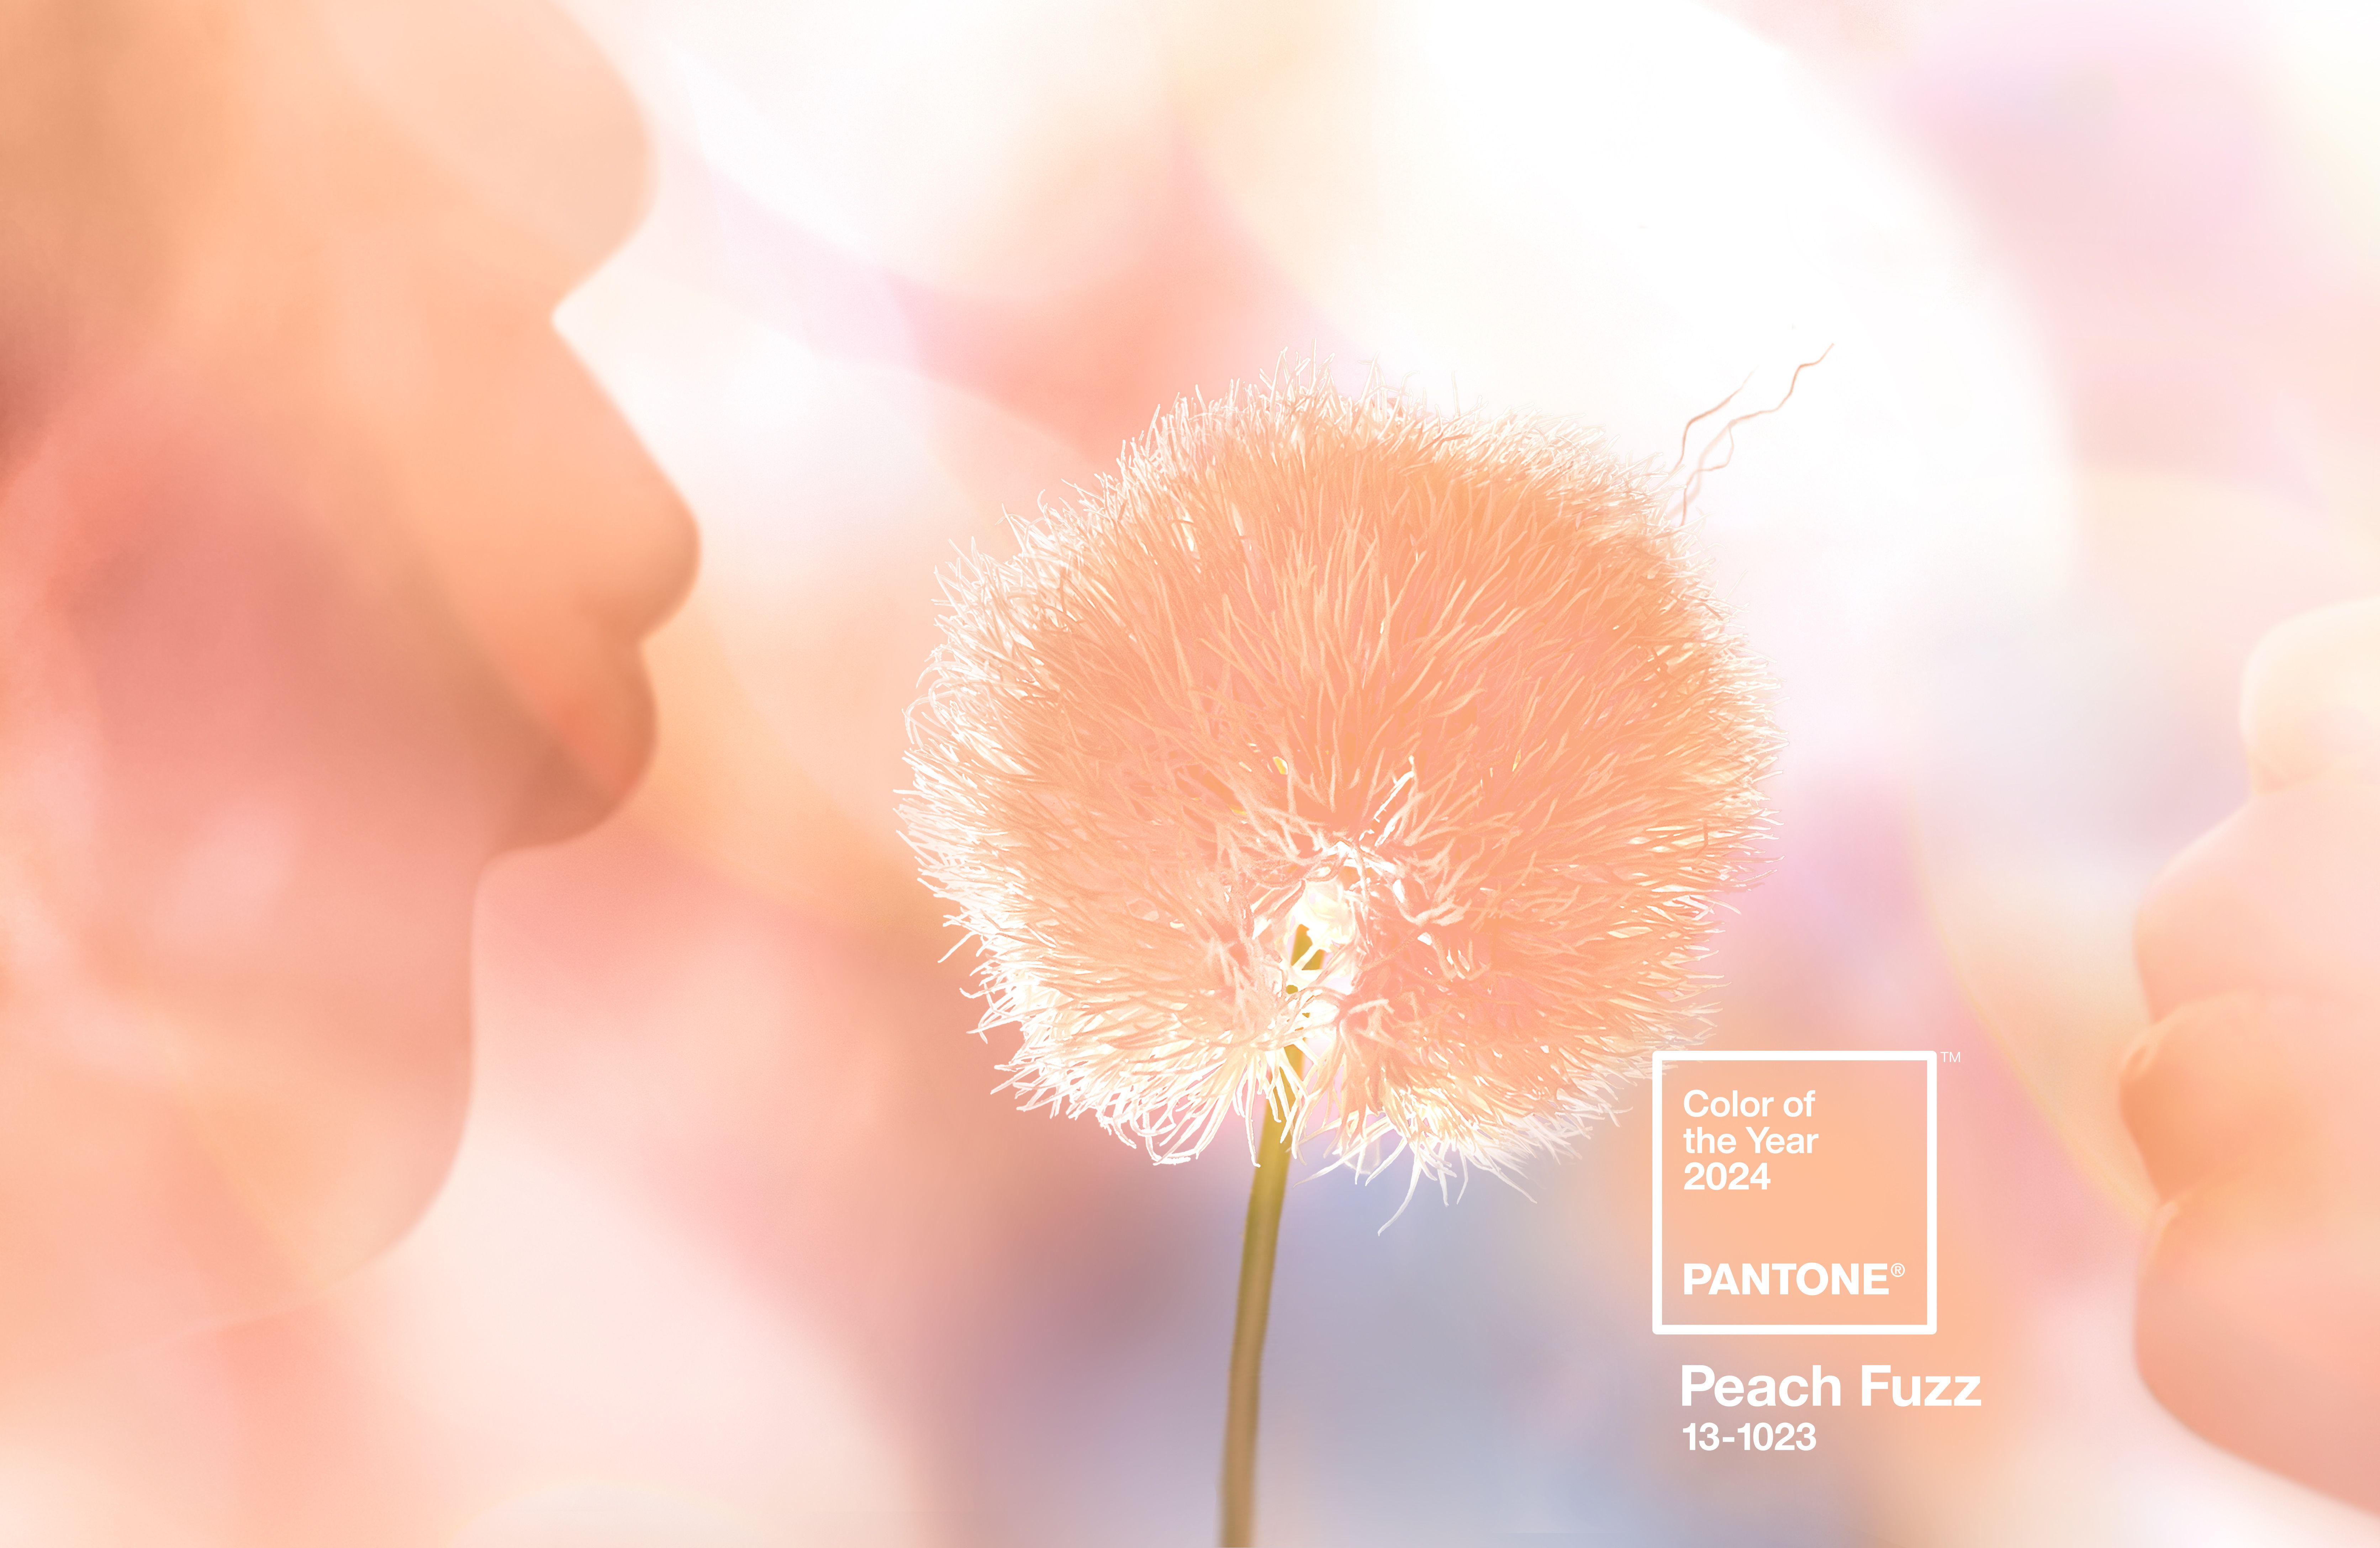 A soft-focus, peachy-hued photo of a person blowing on a dandelion pappus